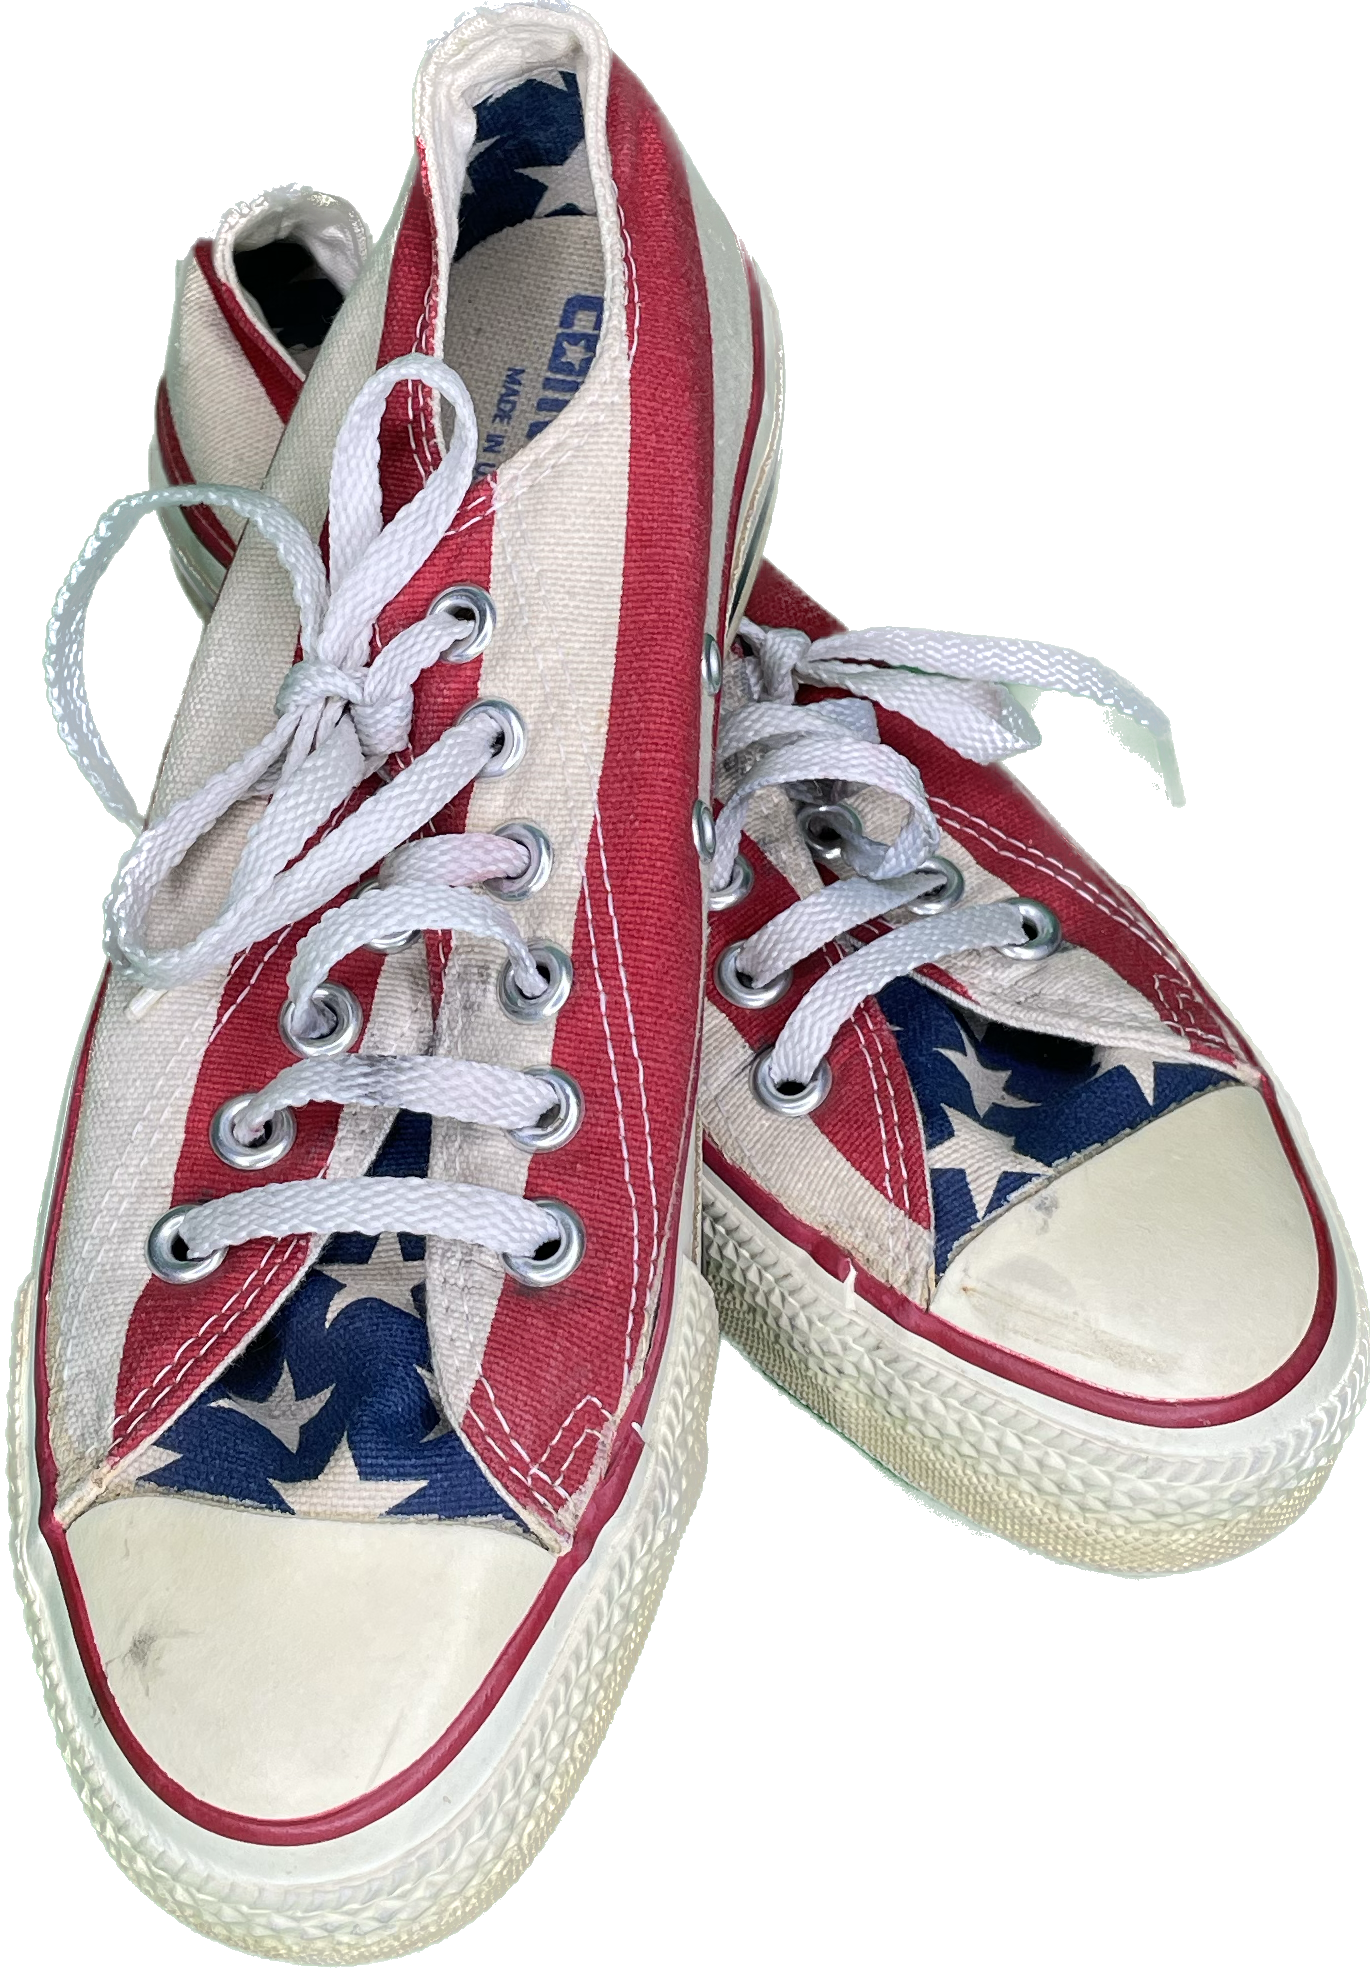 Vintage Sz 5 1/2 Converse American Flag USA Made Skate Surf Shoes 70s 80s